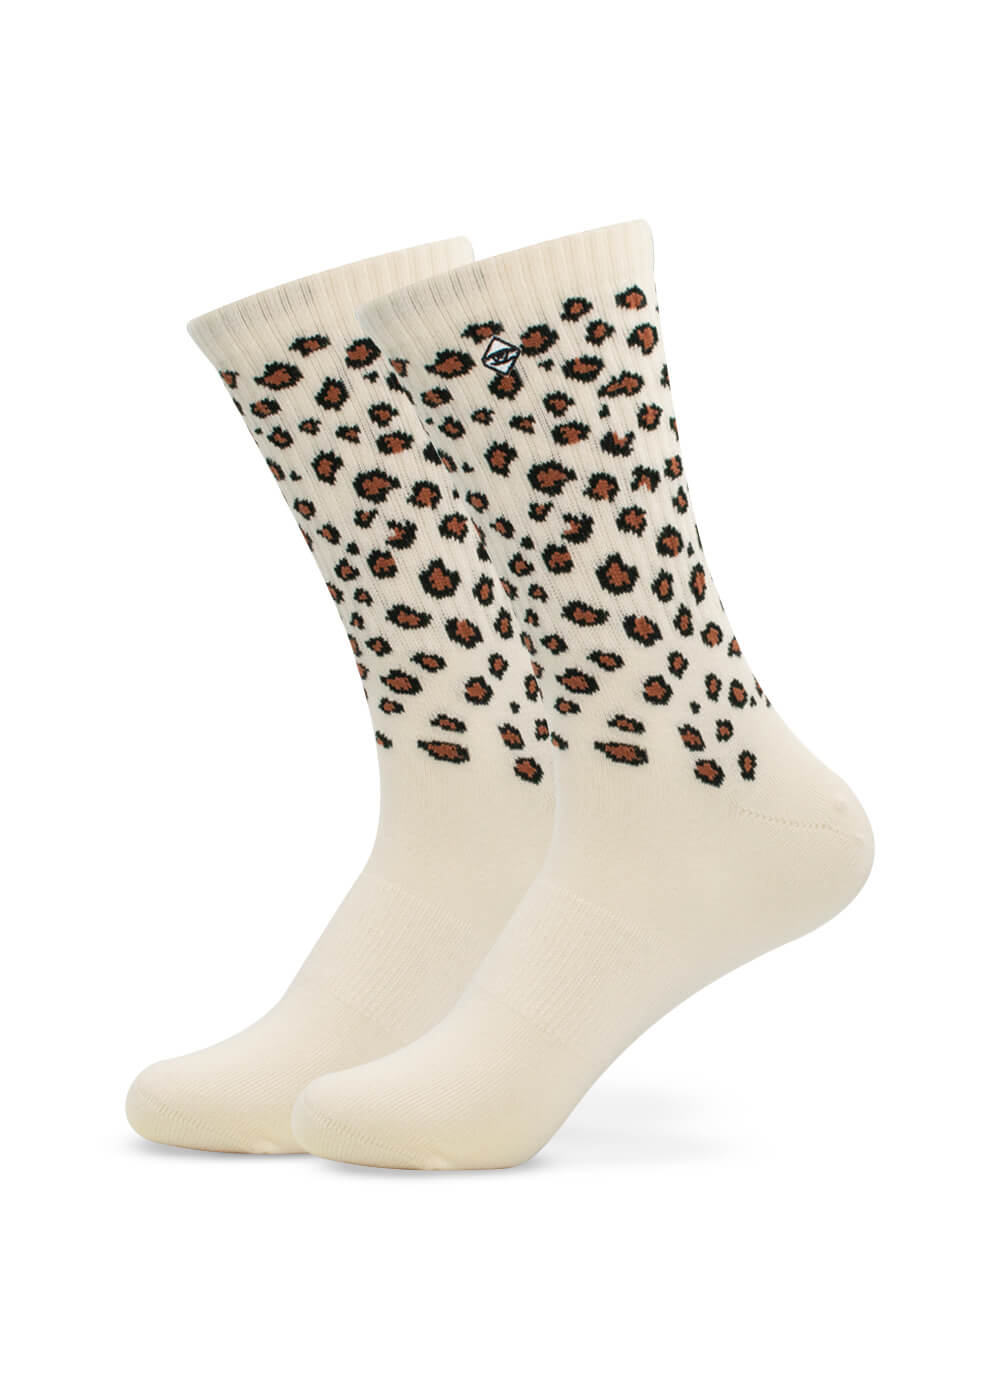 J.Clay Socken mit Leoparden Muster - Made in Portugal